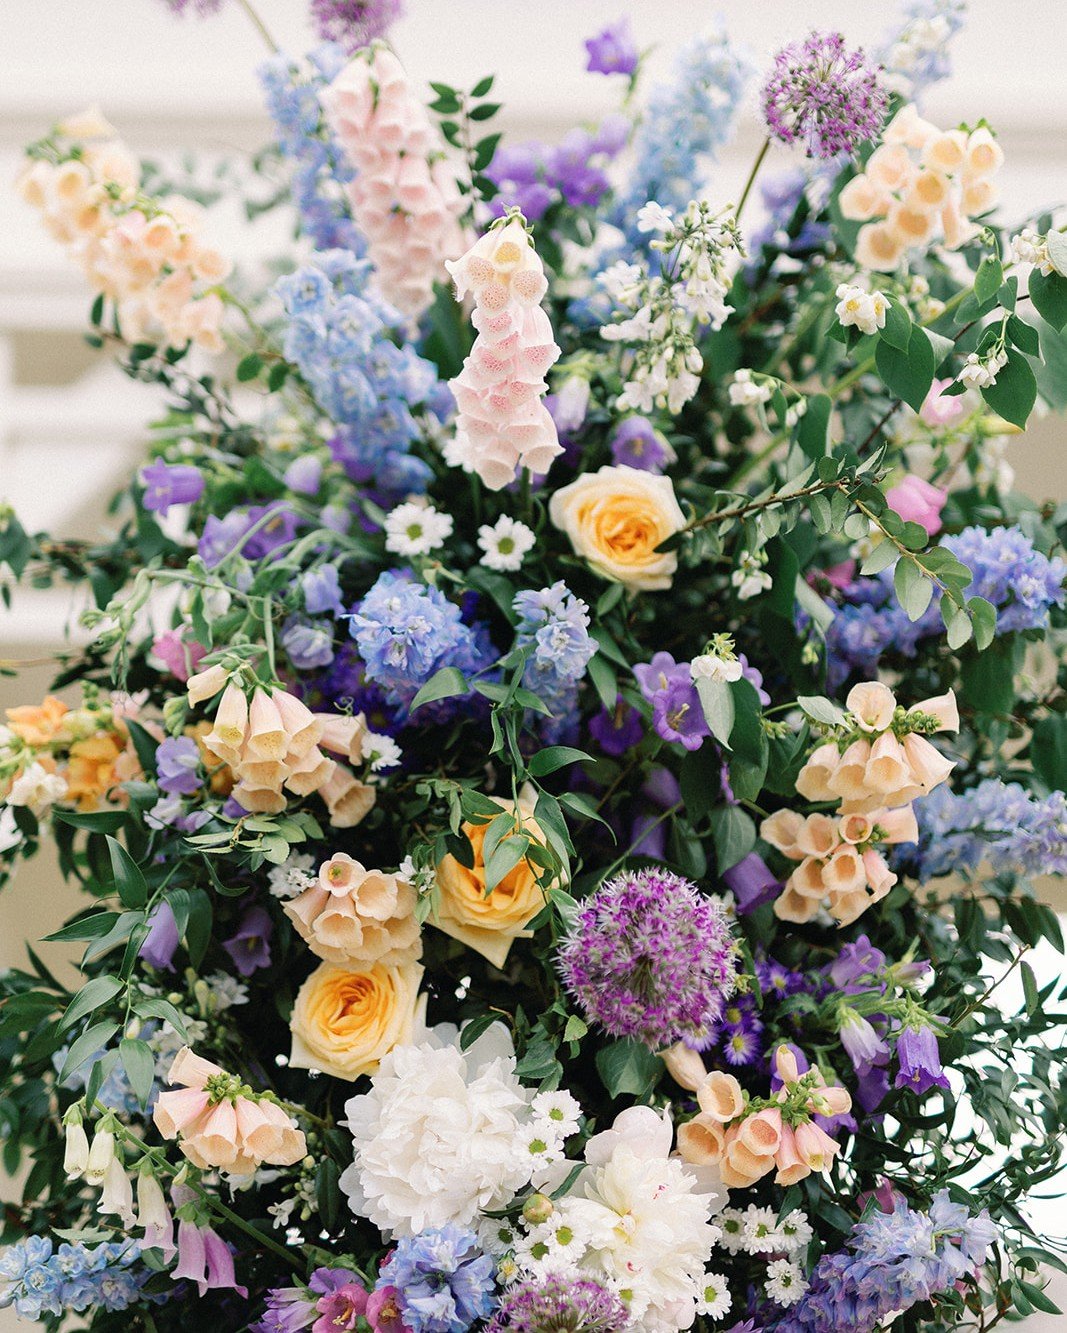 My May weddings coming up are filled with so much color, unique designs, and to my great excitement LOTS of local blooms-including LOTS of foxglove (a personal favorite).

Reminiscing on this colorful pastel wedding from last spring.  This day will b